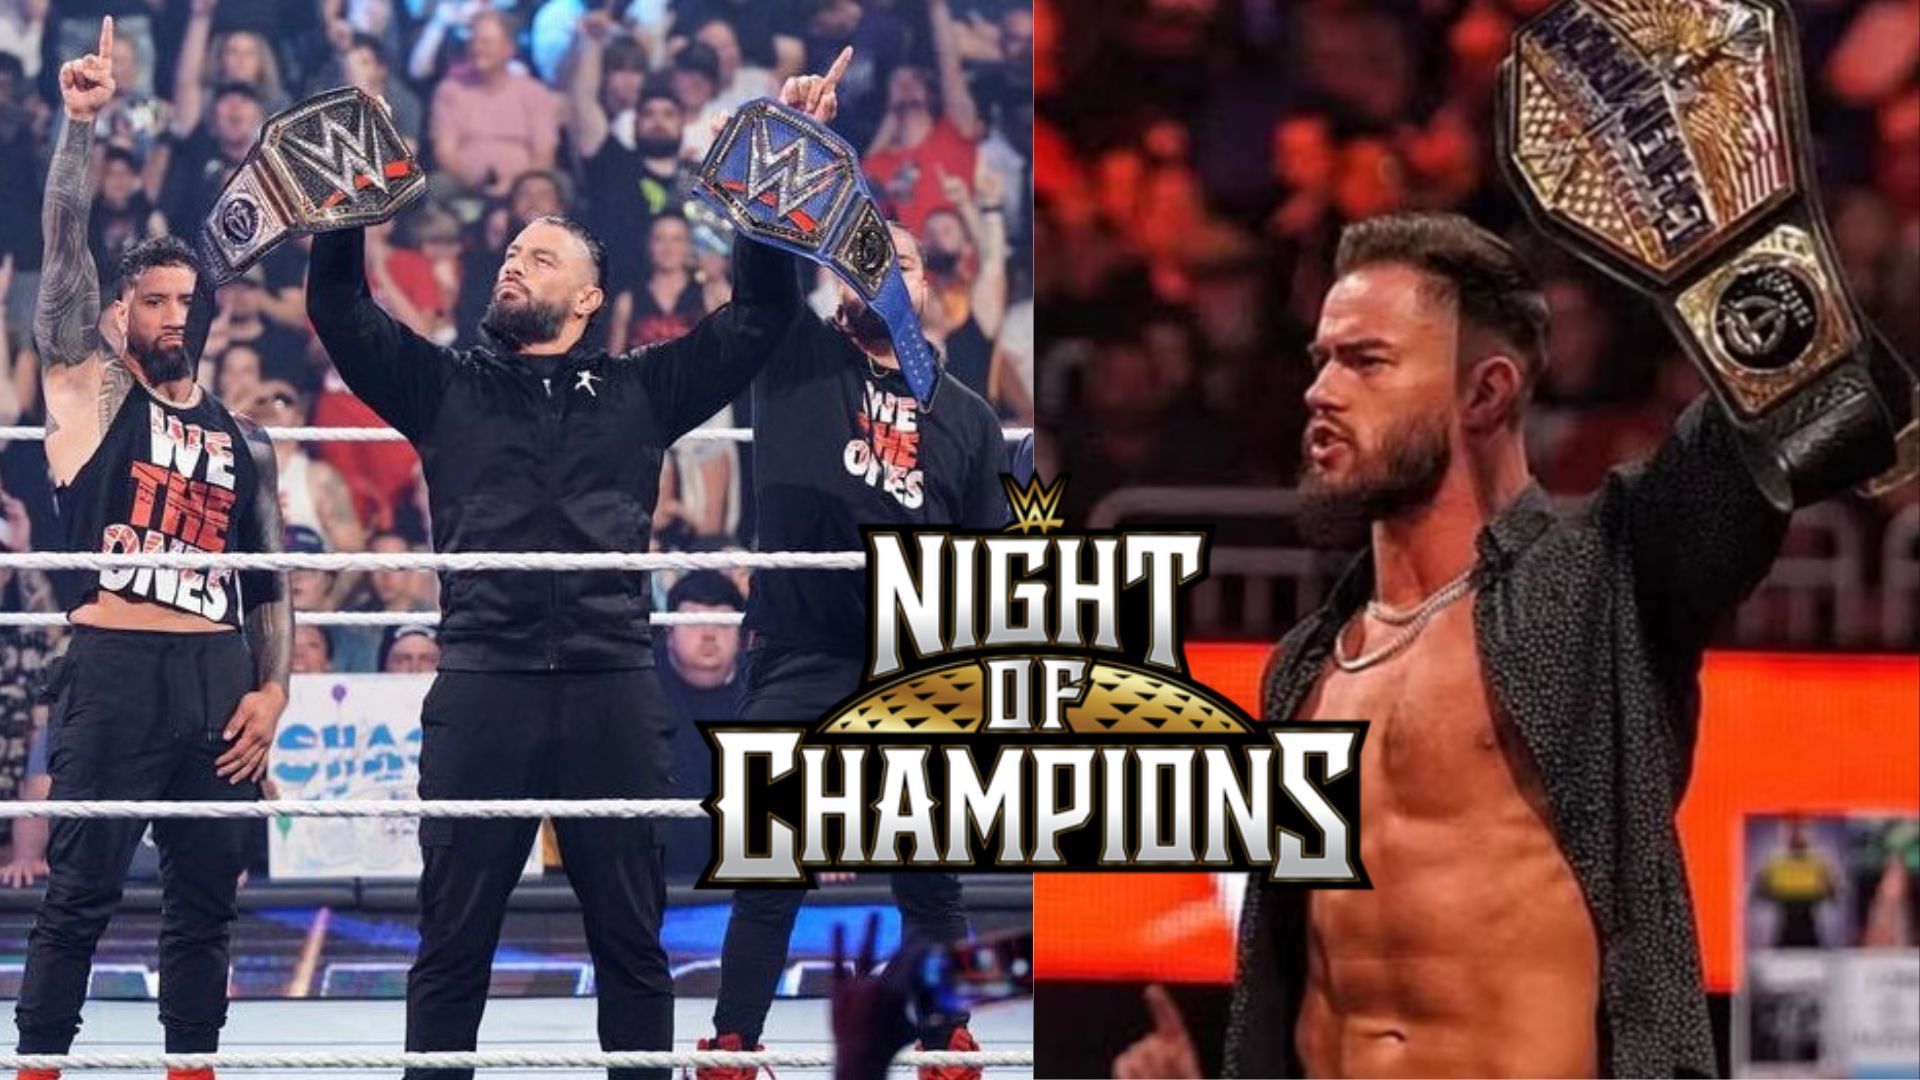 WWE Night of Champions could have some interesting additions